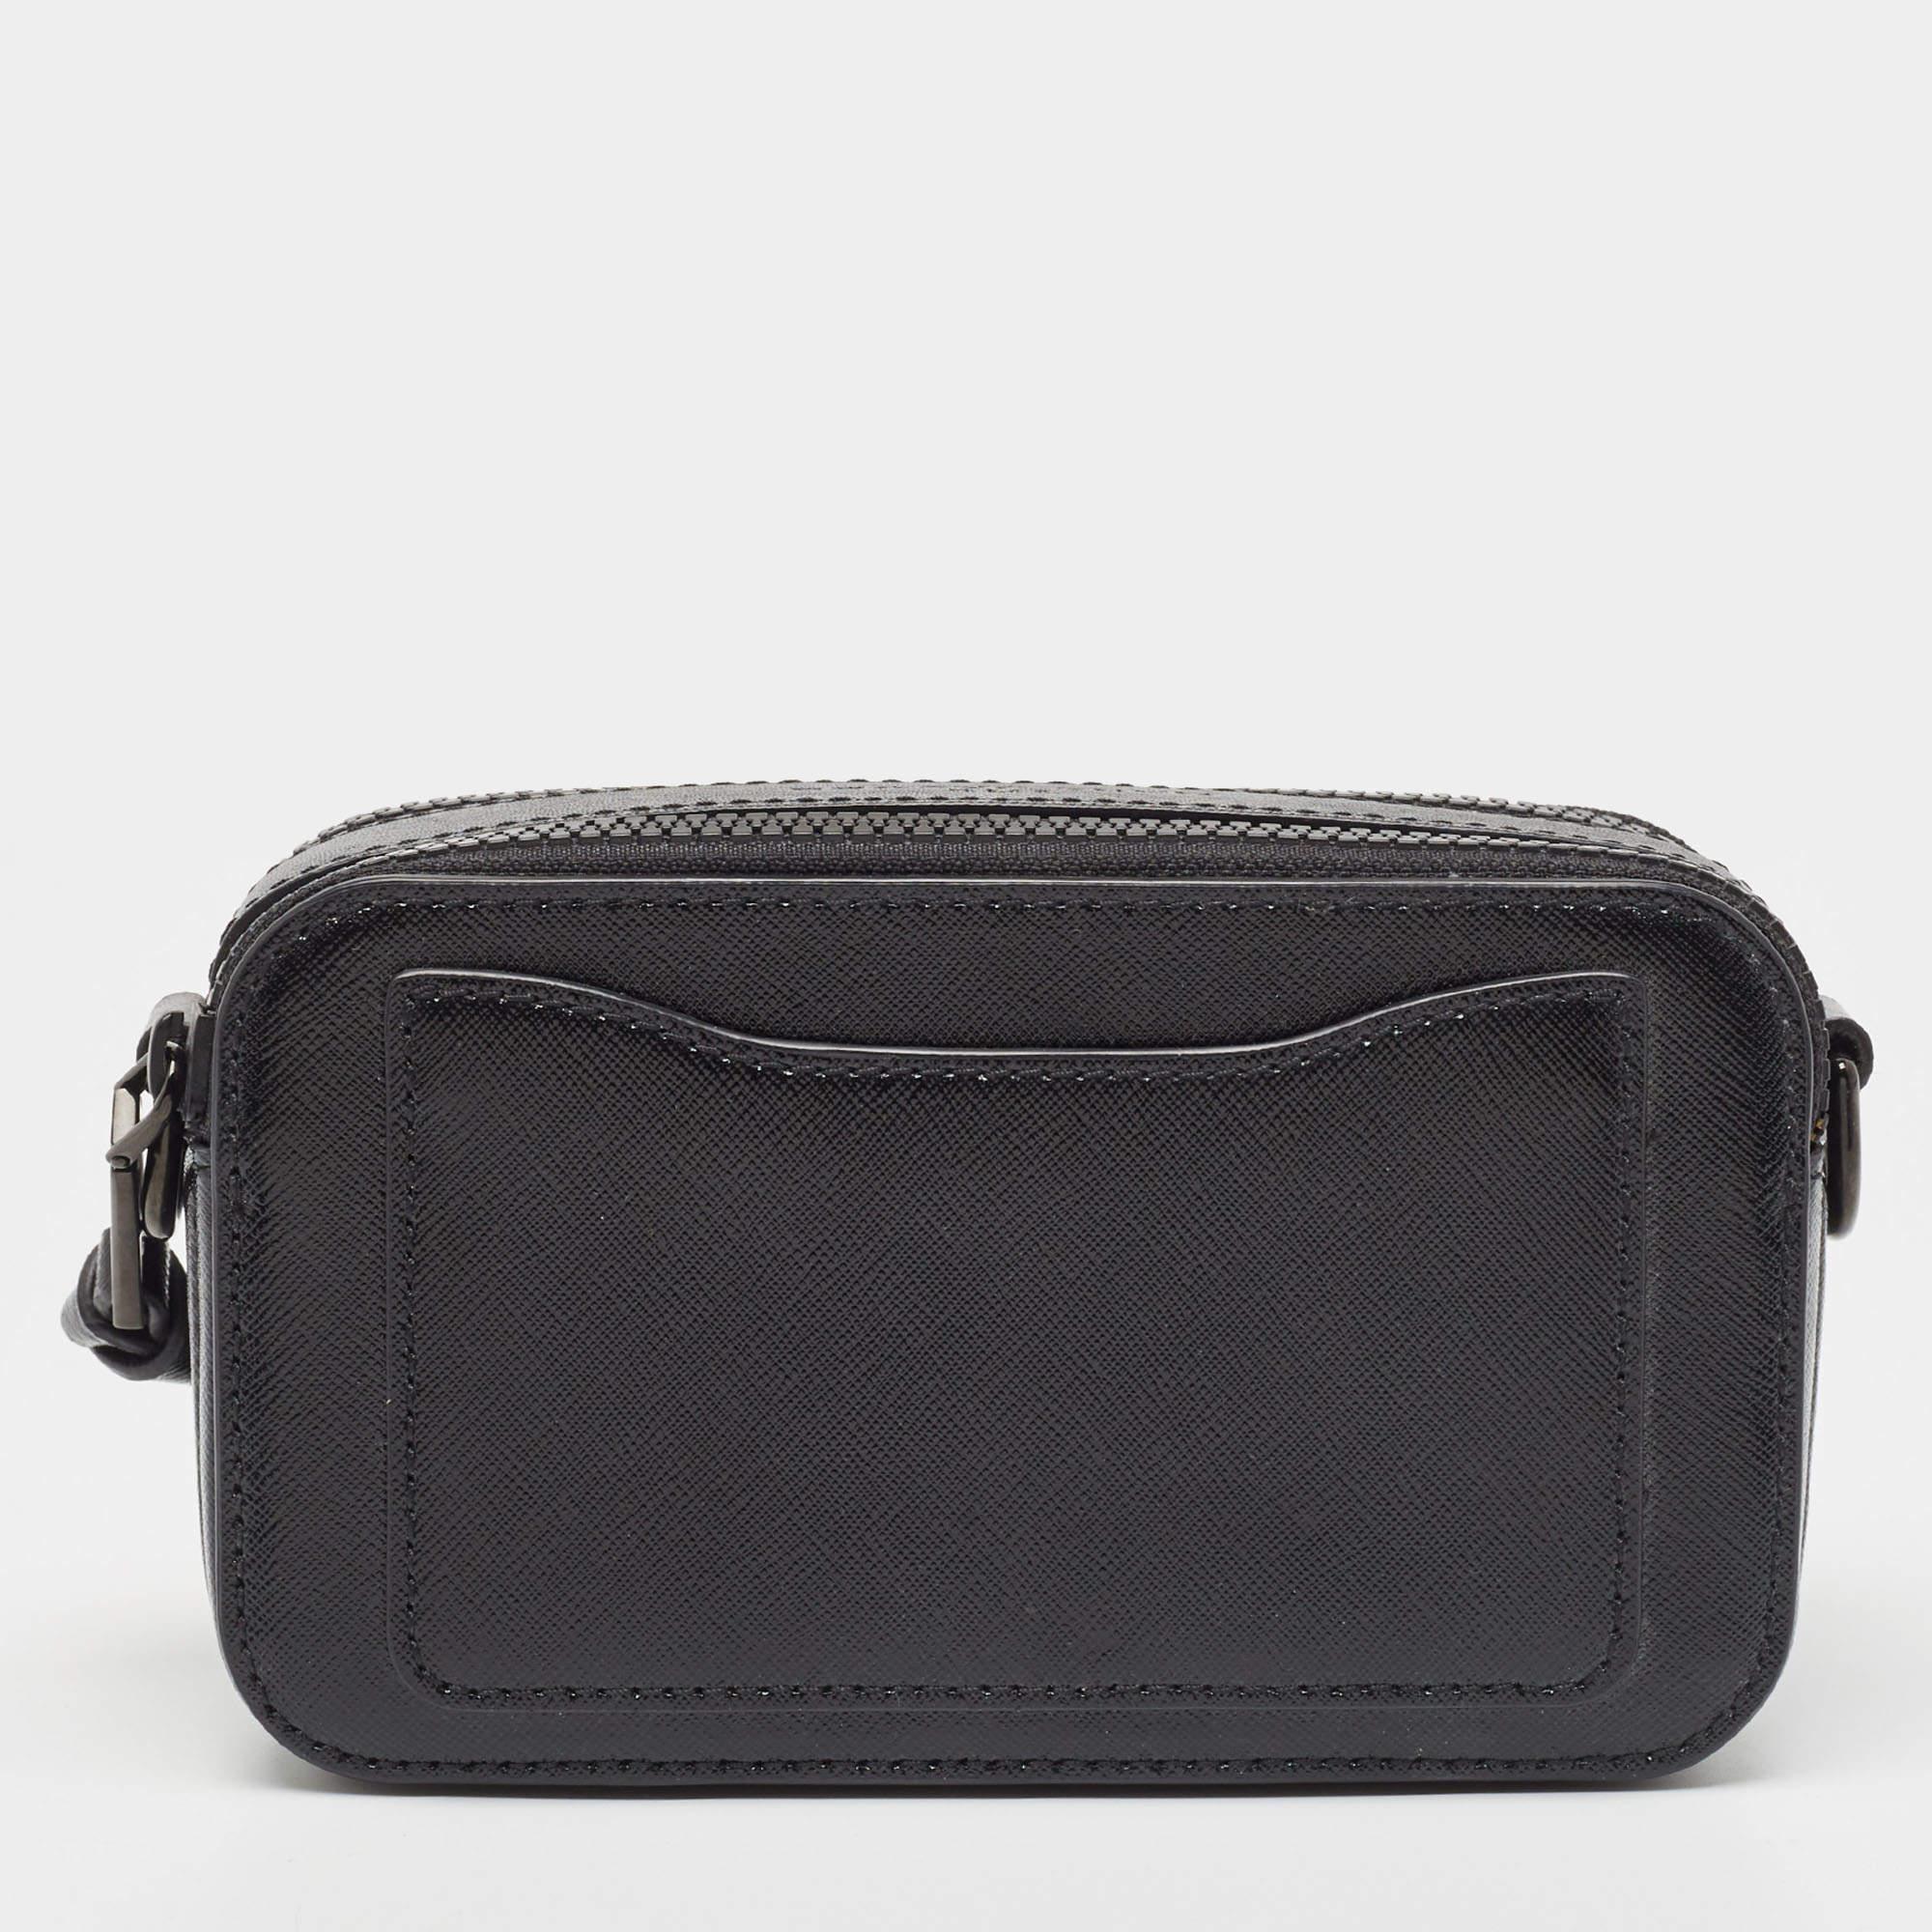 Structured, sophisticated, and stylish are some words that describe this Snapshot crossbody bag! Crafted from best quality material, the creation is adorned with the label's signature appeal, held by comfortable handles, and equipped with a